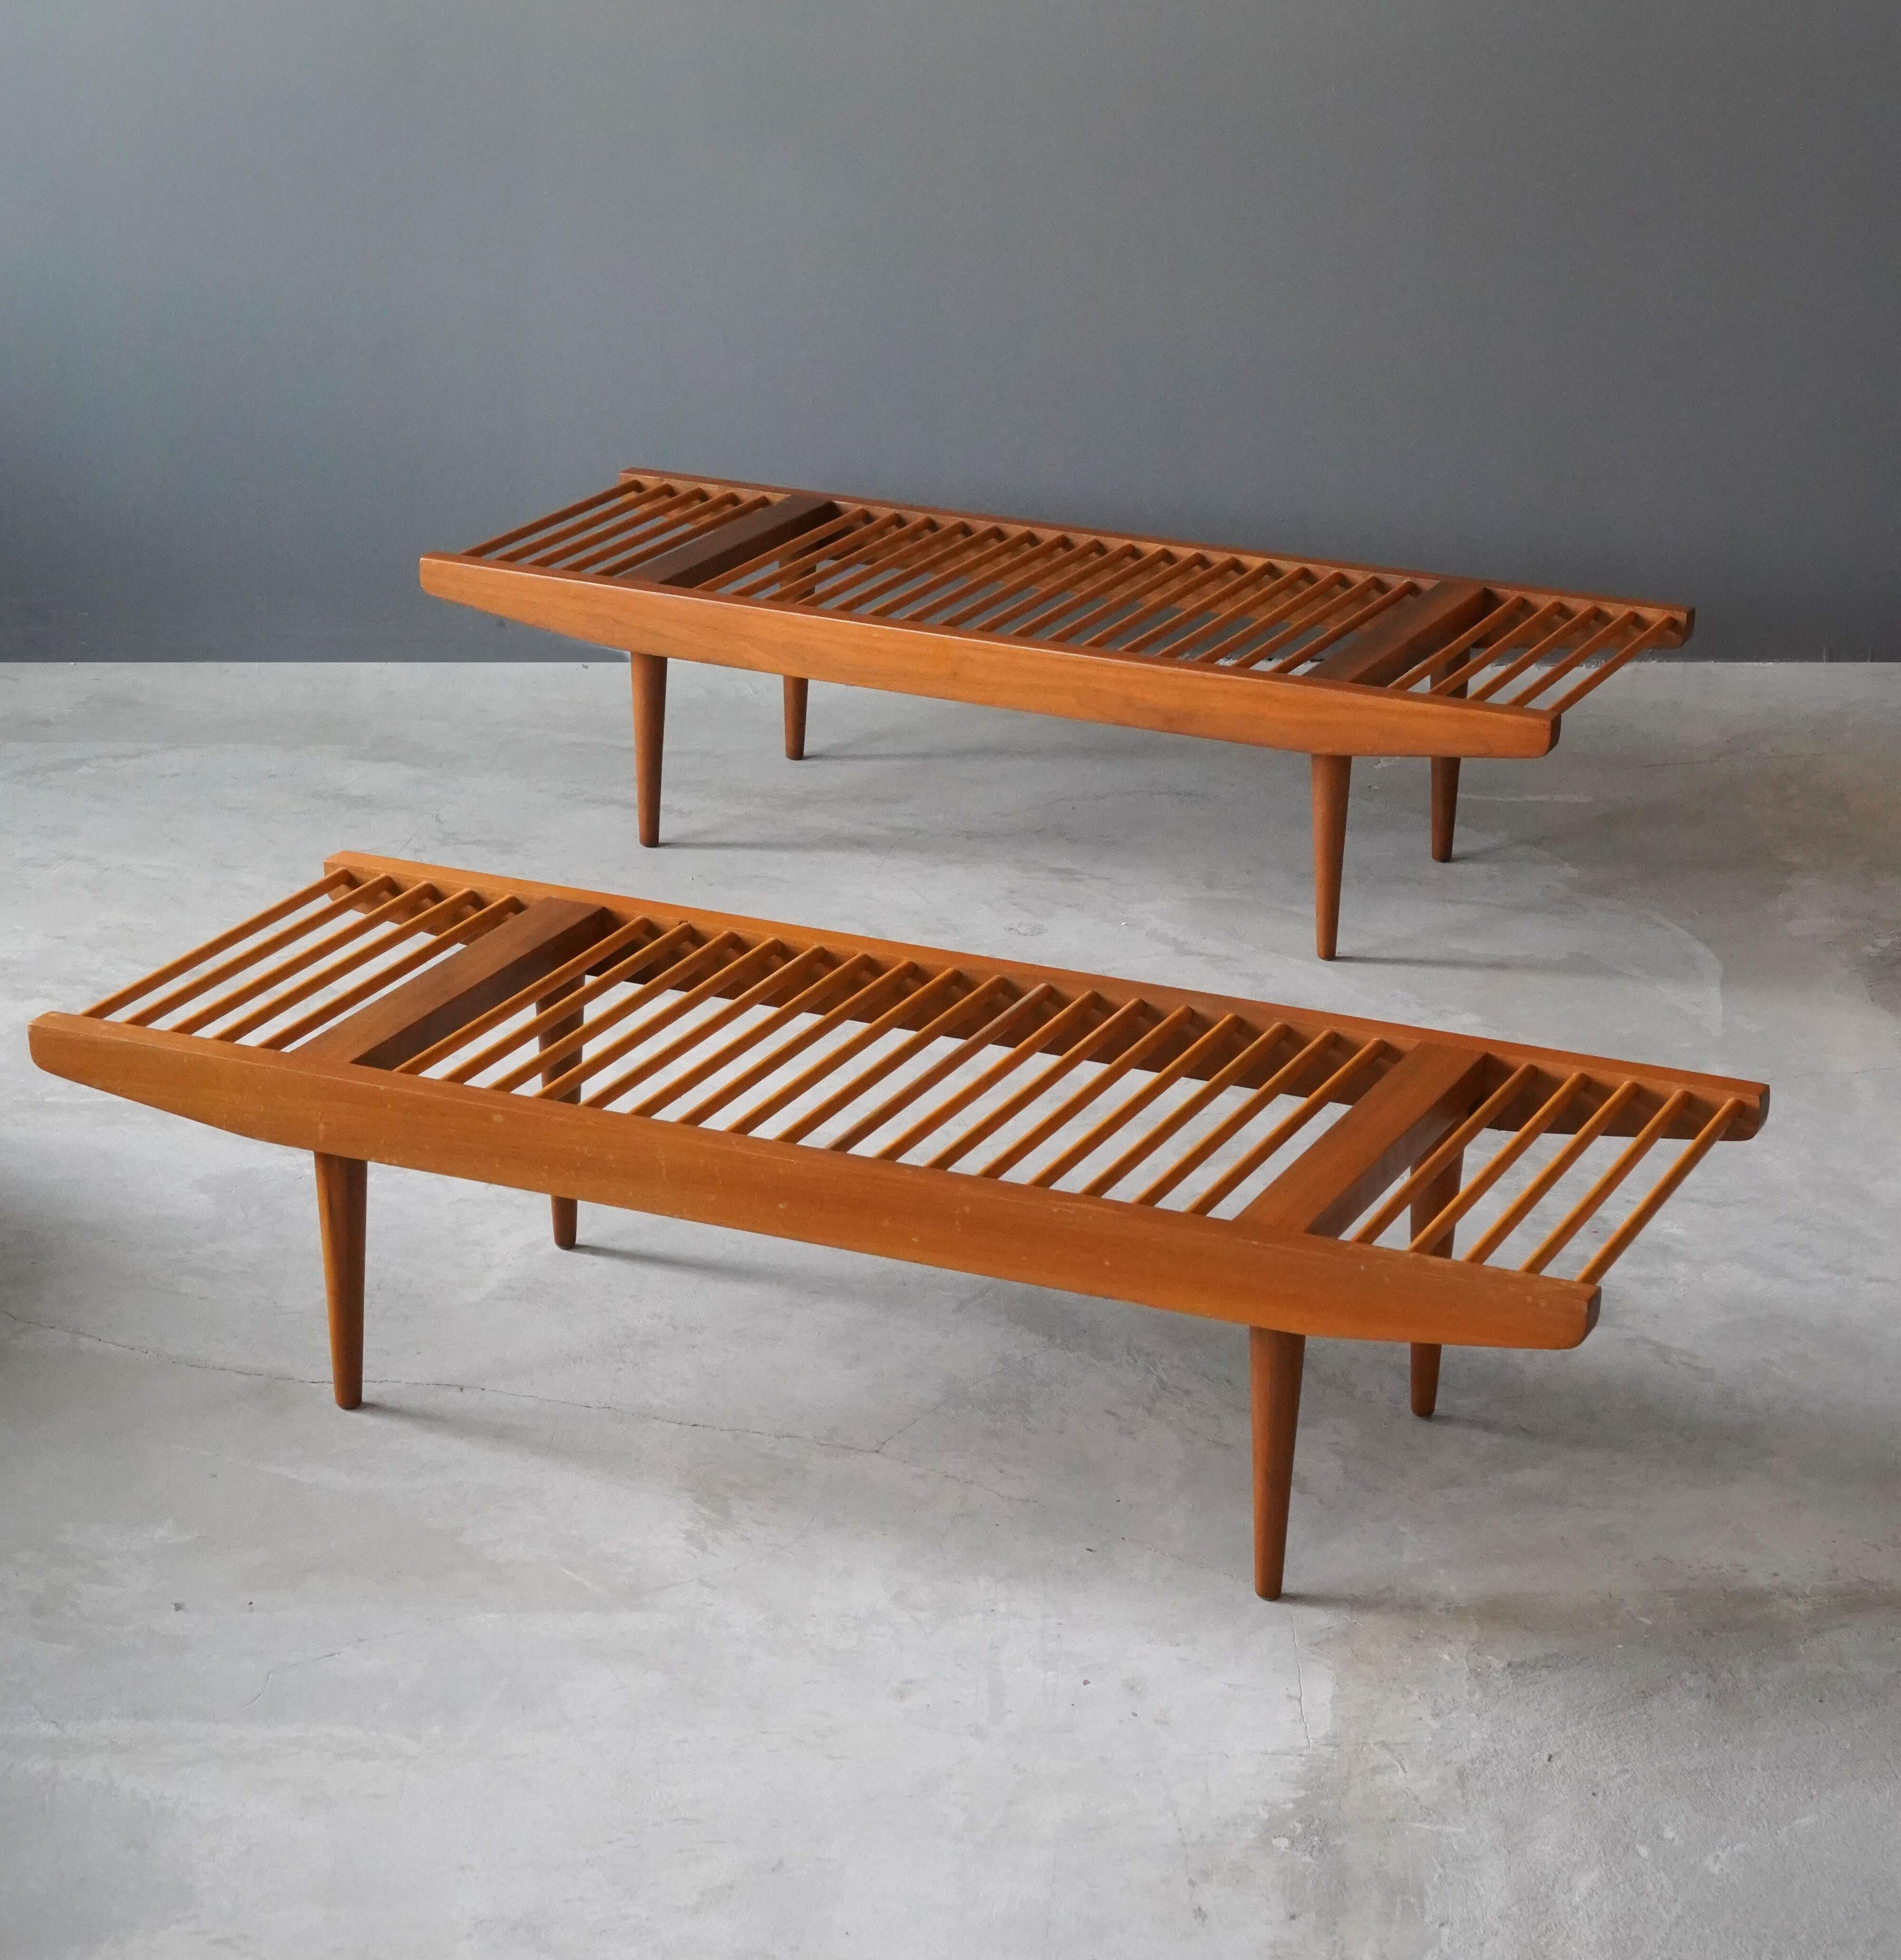 A pair of benches, designed by Milo Baughman for Glenn of California. Circa 1952. In solid walnut.

Other designers of the period include Edward Wormley, Paul Frankl, George Nakashima, Isamu Noguchi, and T.H. Robsjohn-Gibbings.